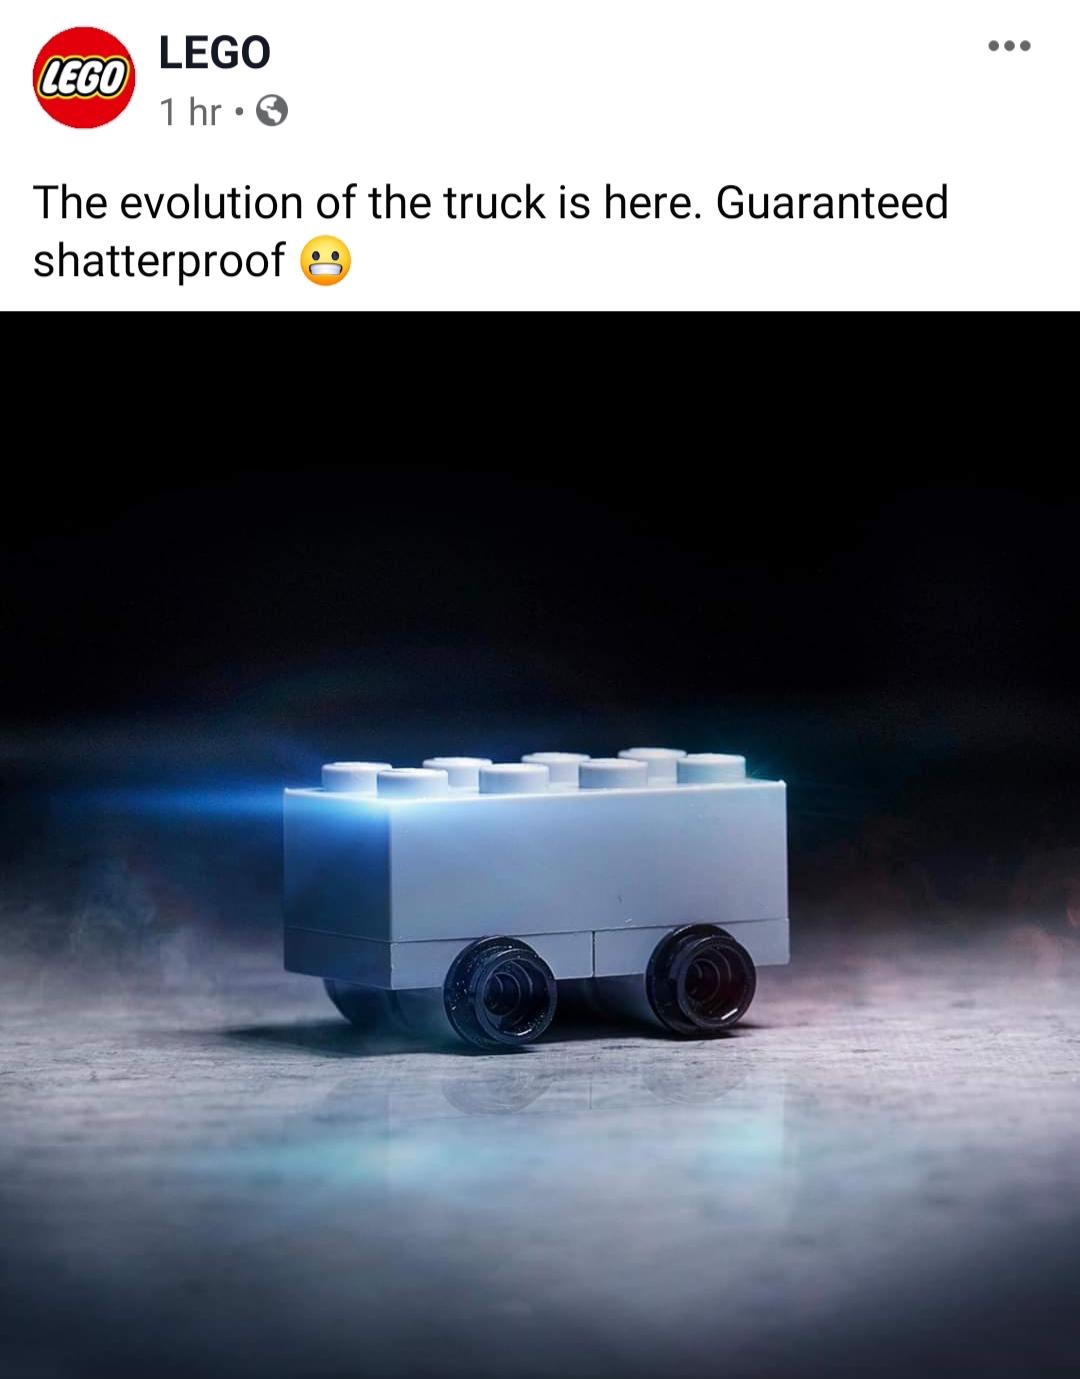 computer wallpaper - Lego Lego 1 hr The evolution of the truck is here. Guaranteed shatterproof